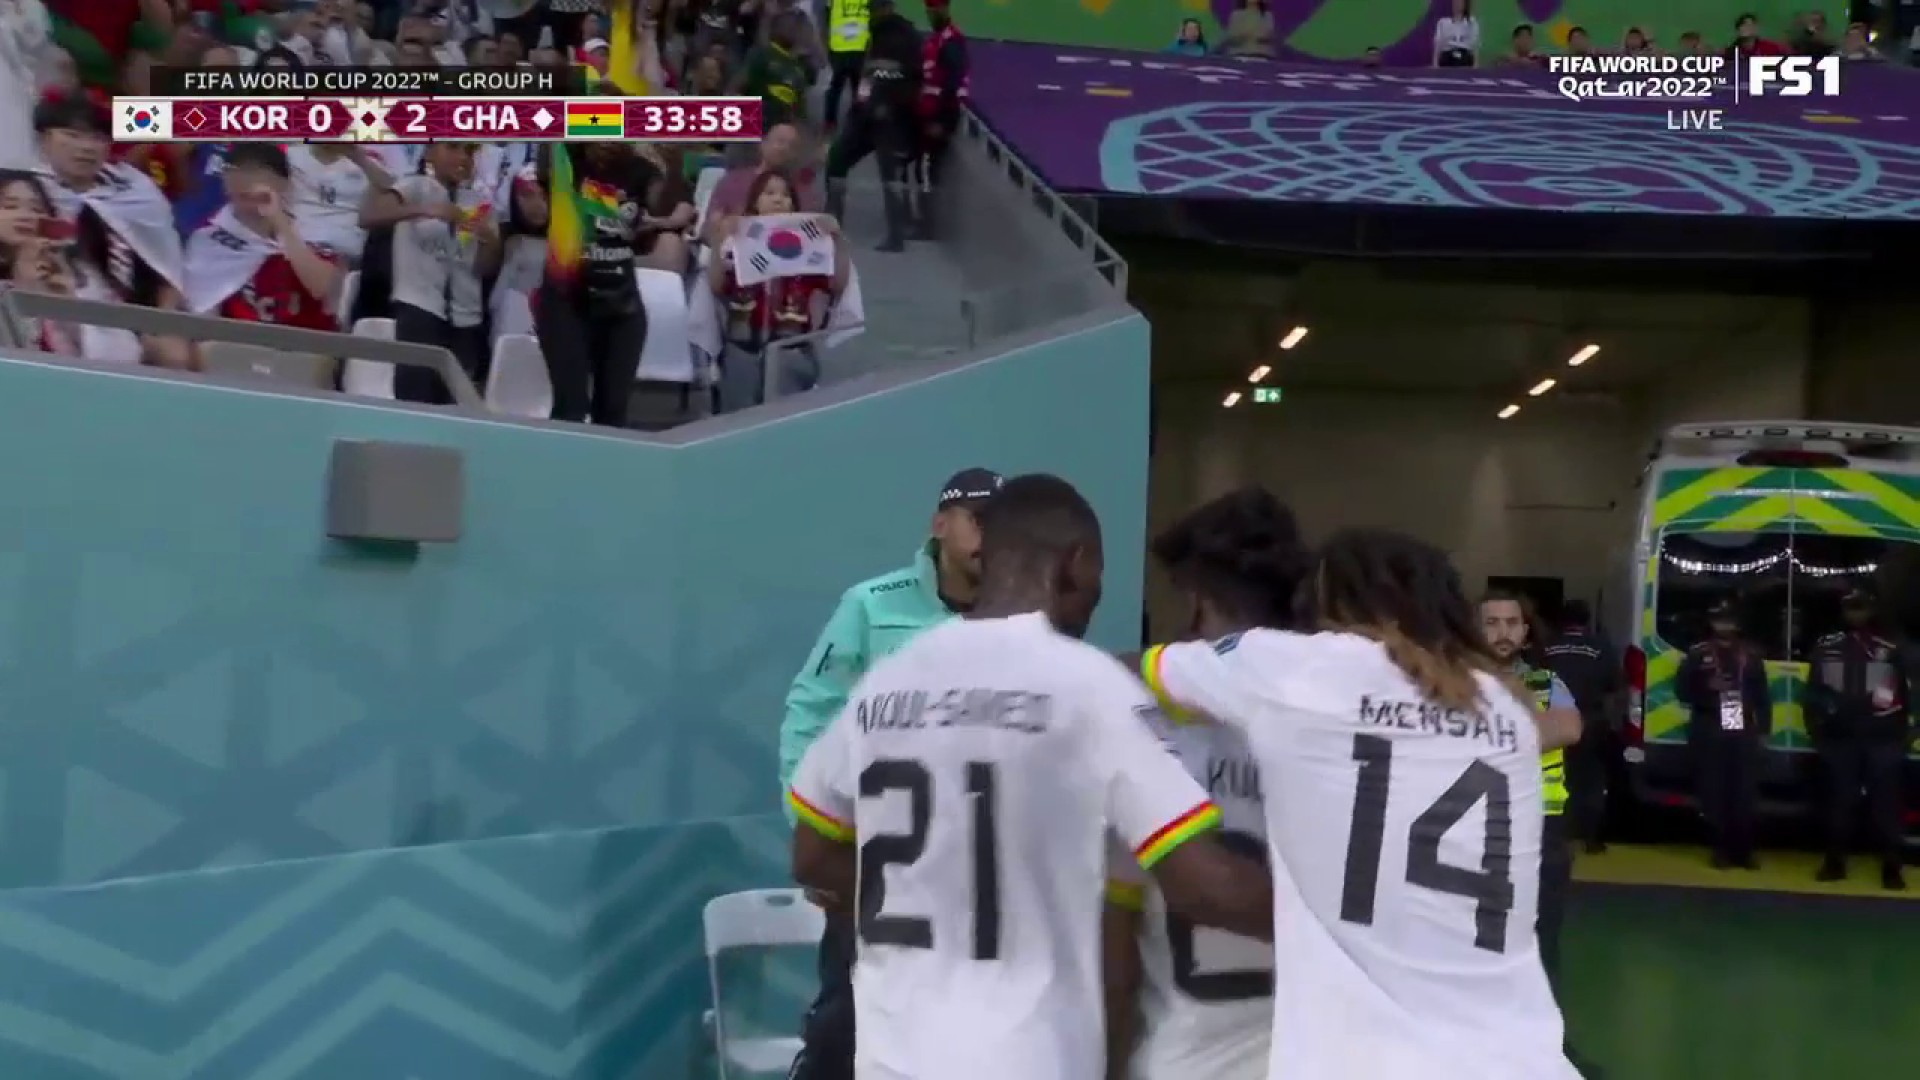 TWO FOR GHANA 😤

The pass by Jordan Ayew to set up the goal was a beauty 🎯”